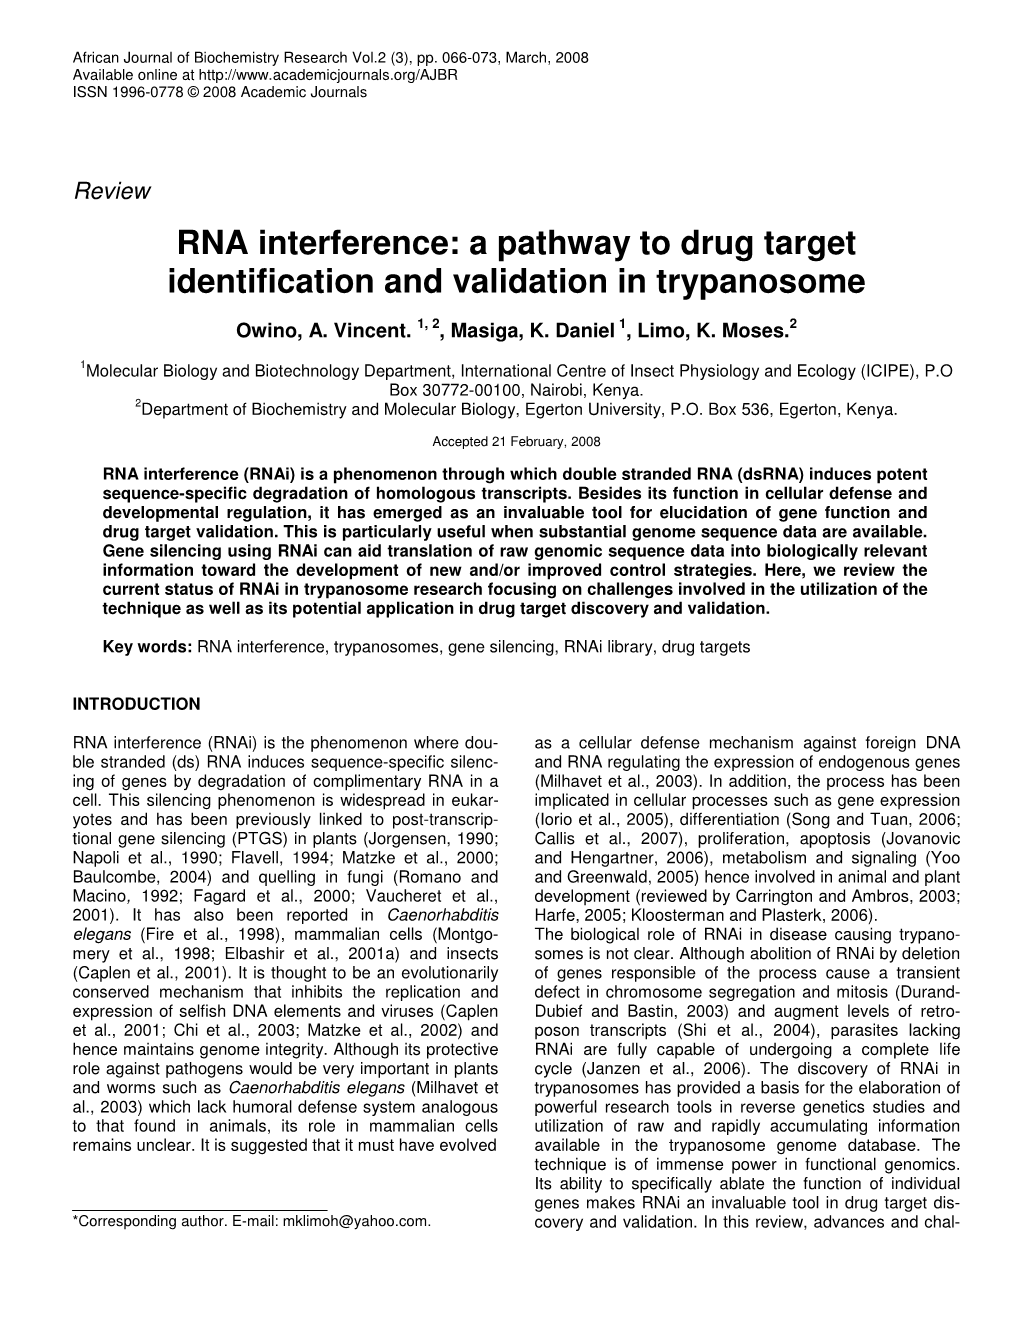 RNA Interference: a Pathway to Drug Target Identification and Validation in Trypanosome